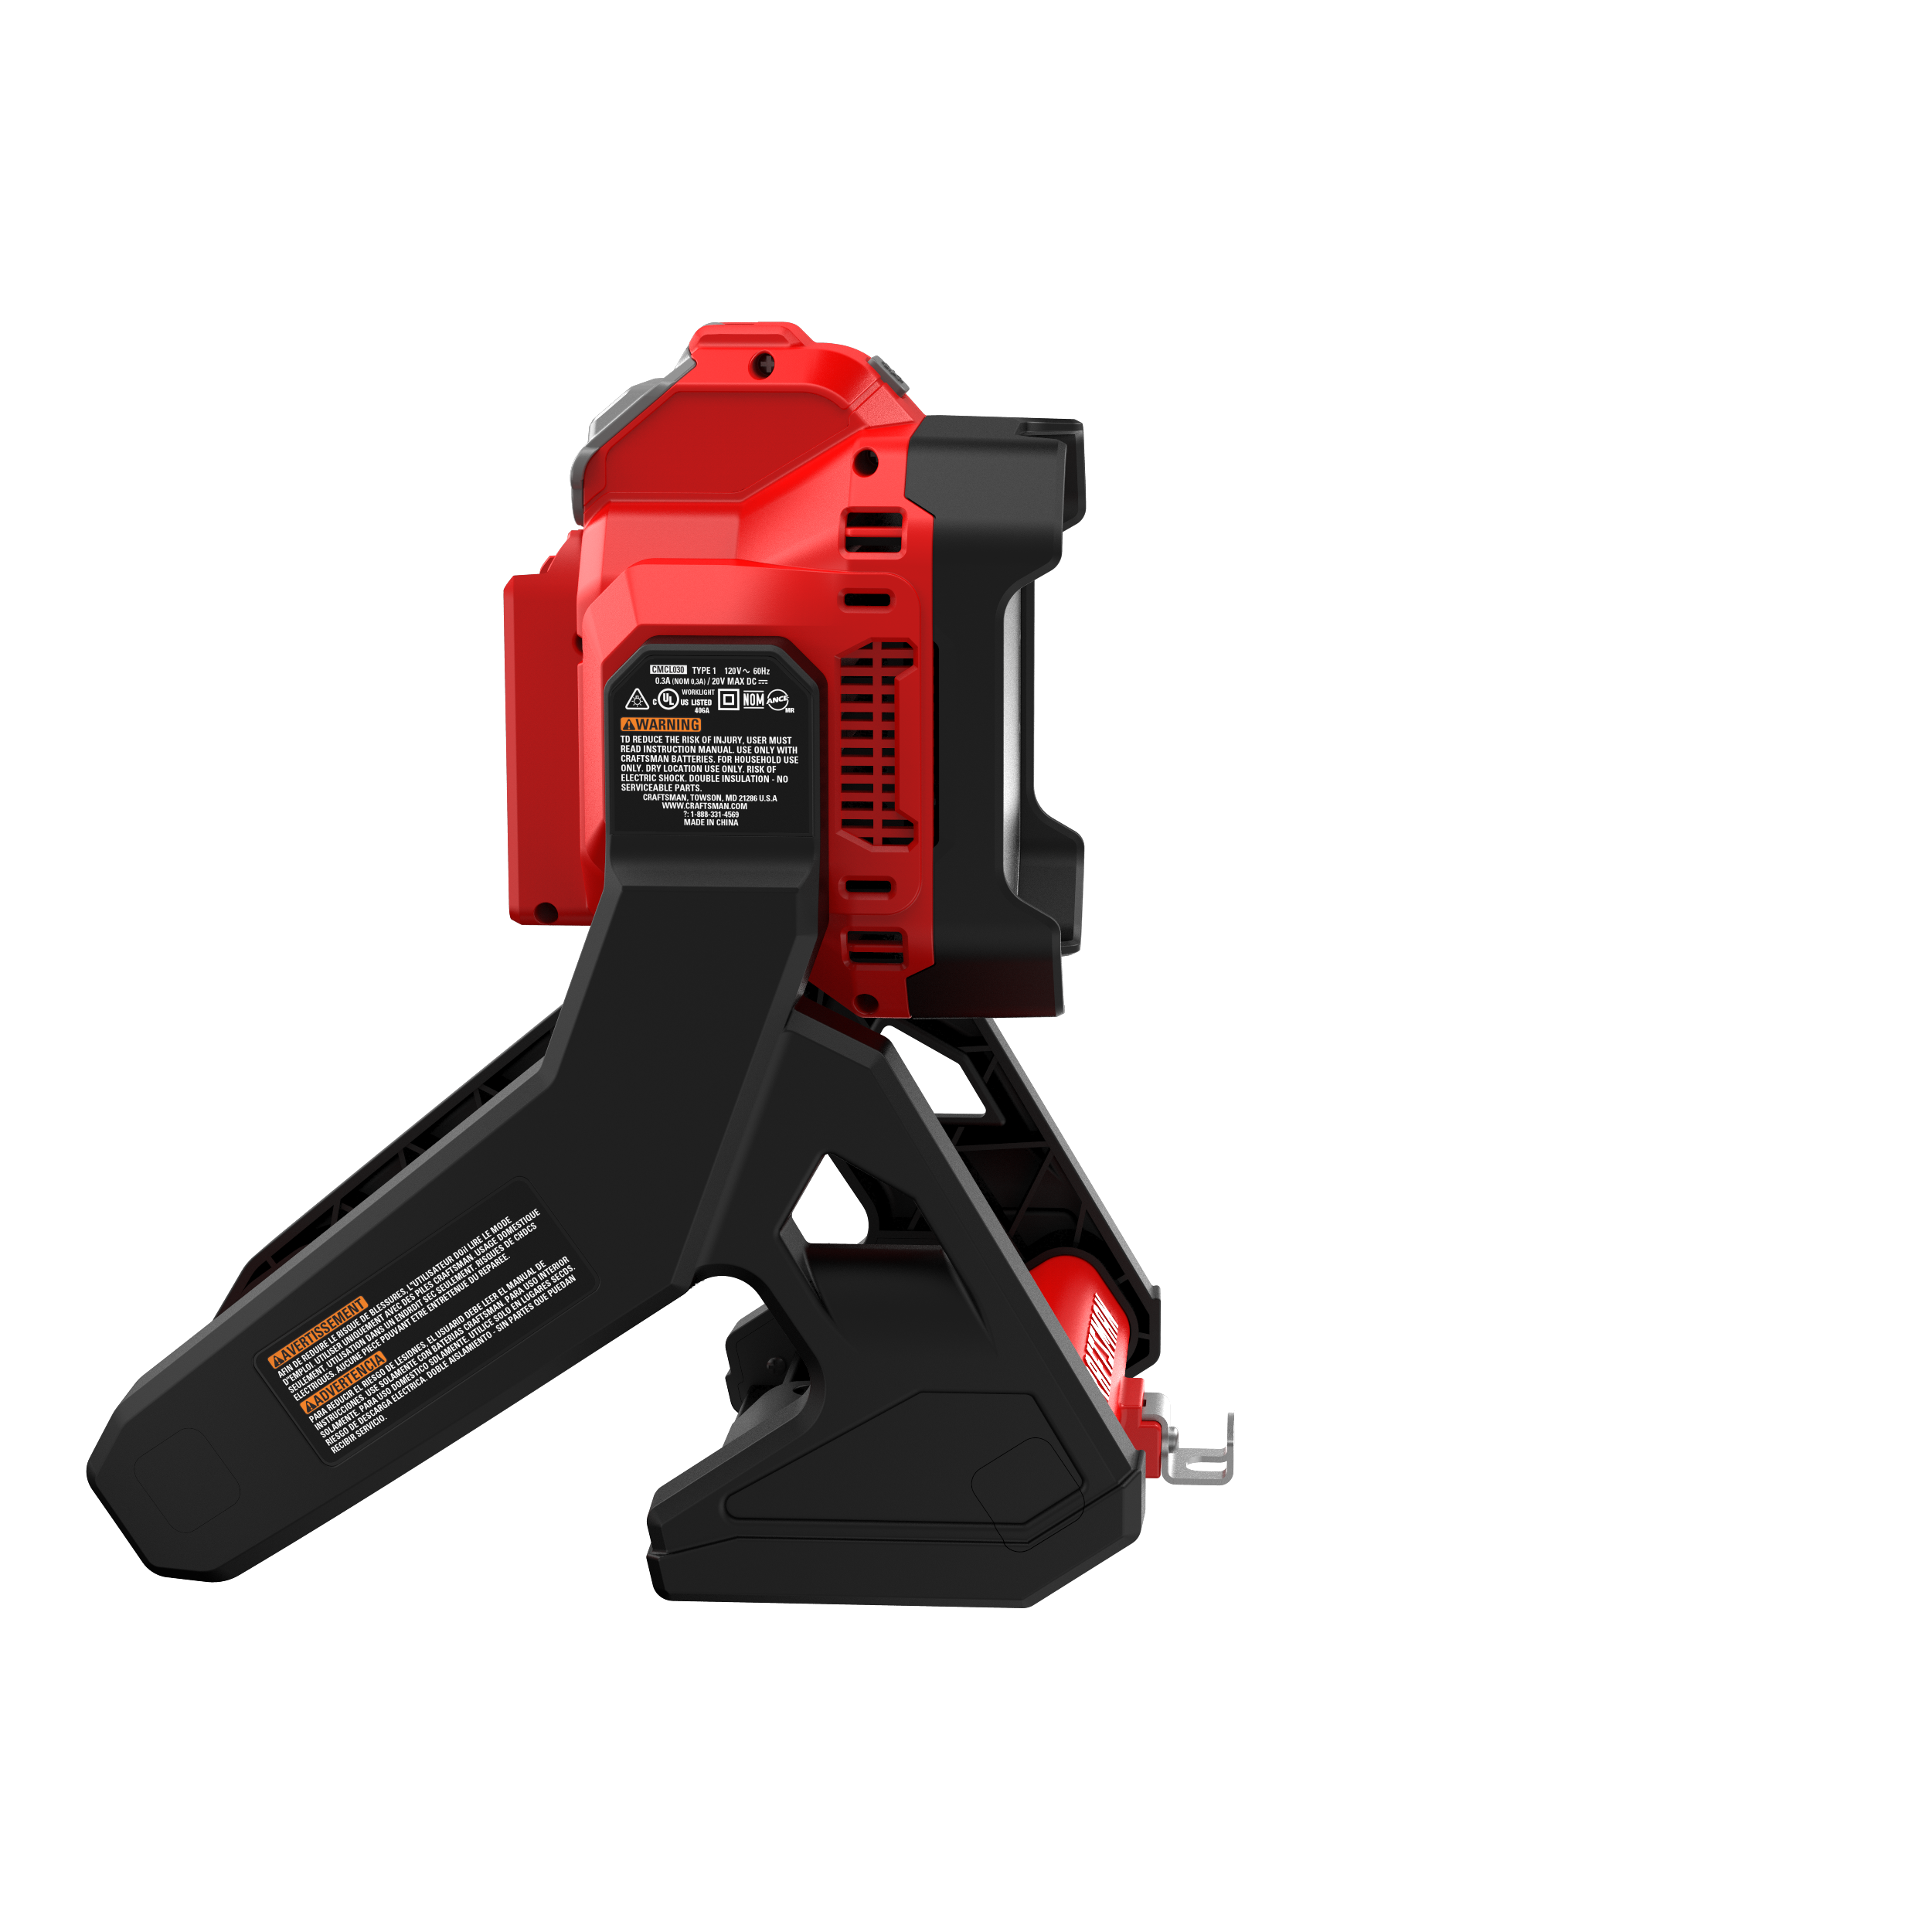 CRAFTSMAN V20* LED Work Light, Small Area, Tool Only (CMCL030B)